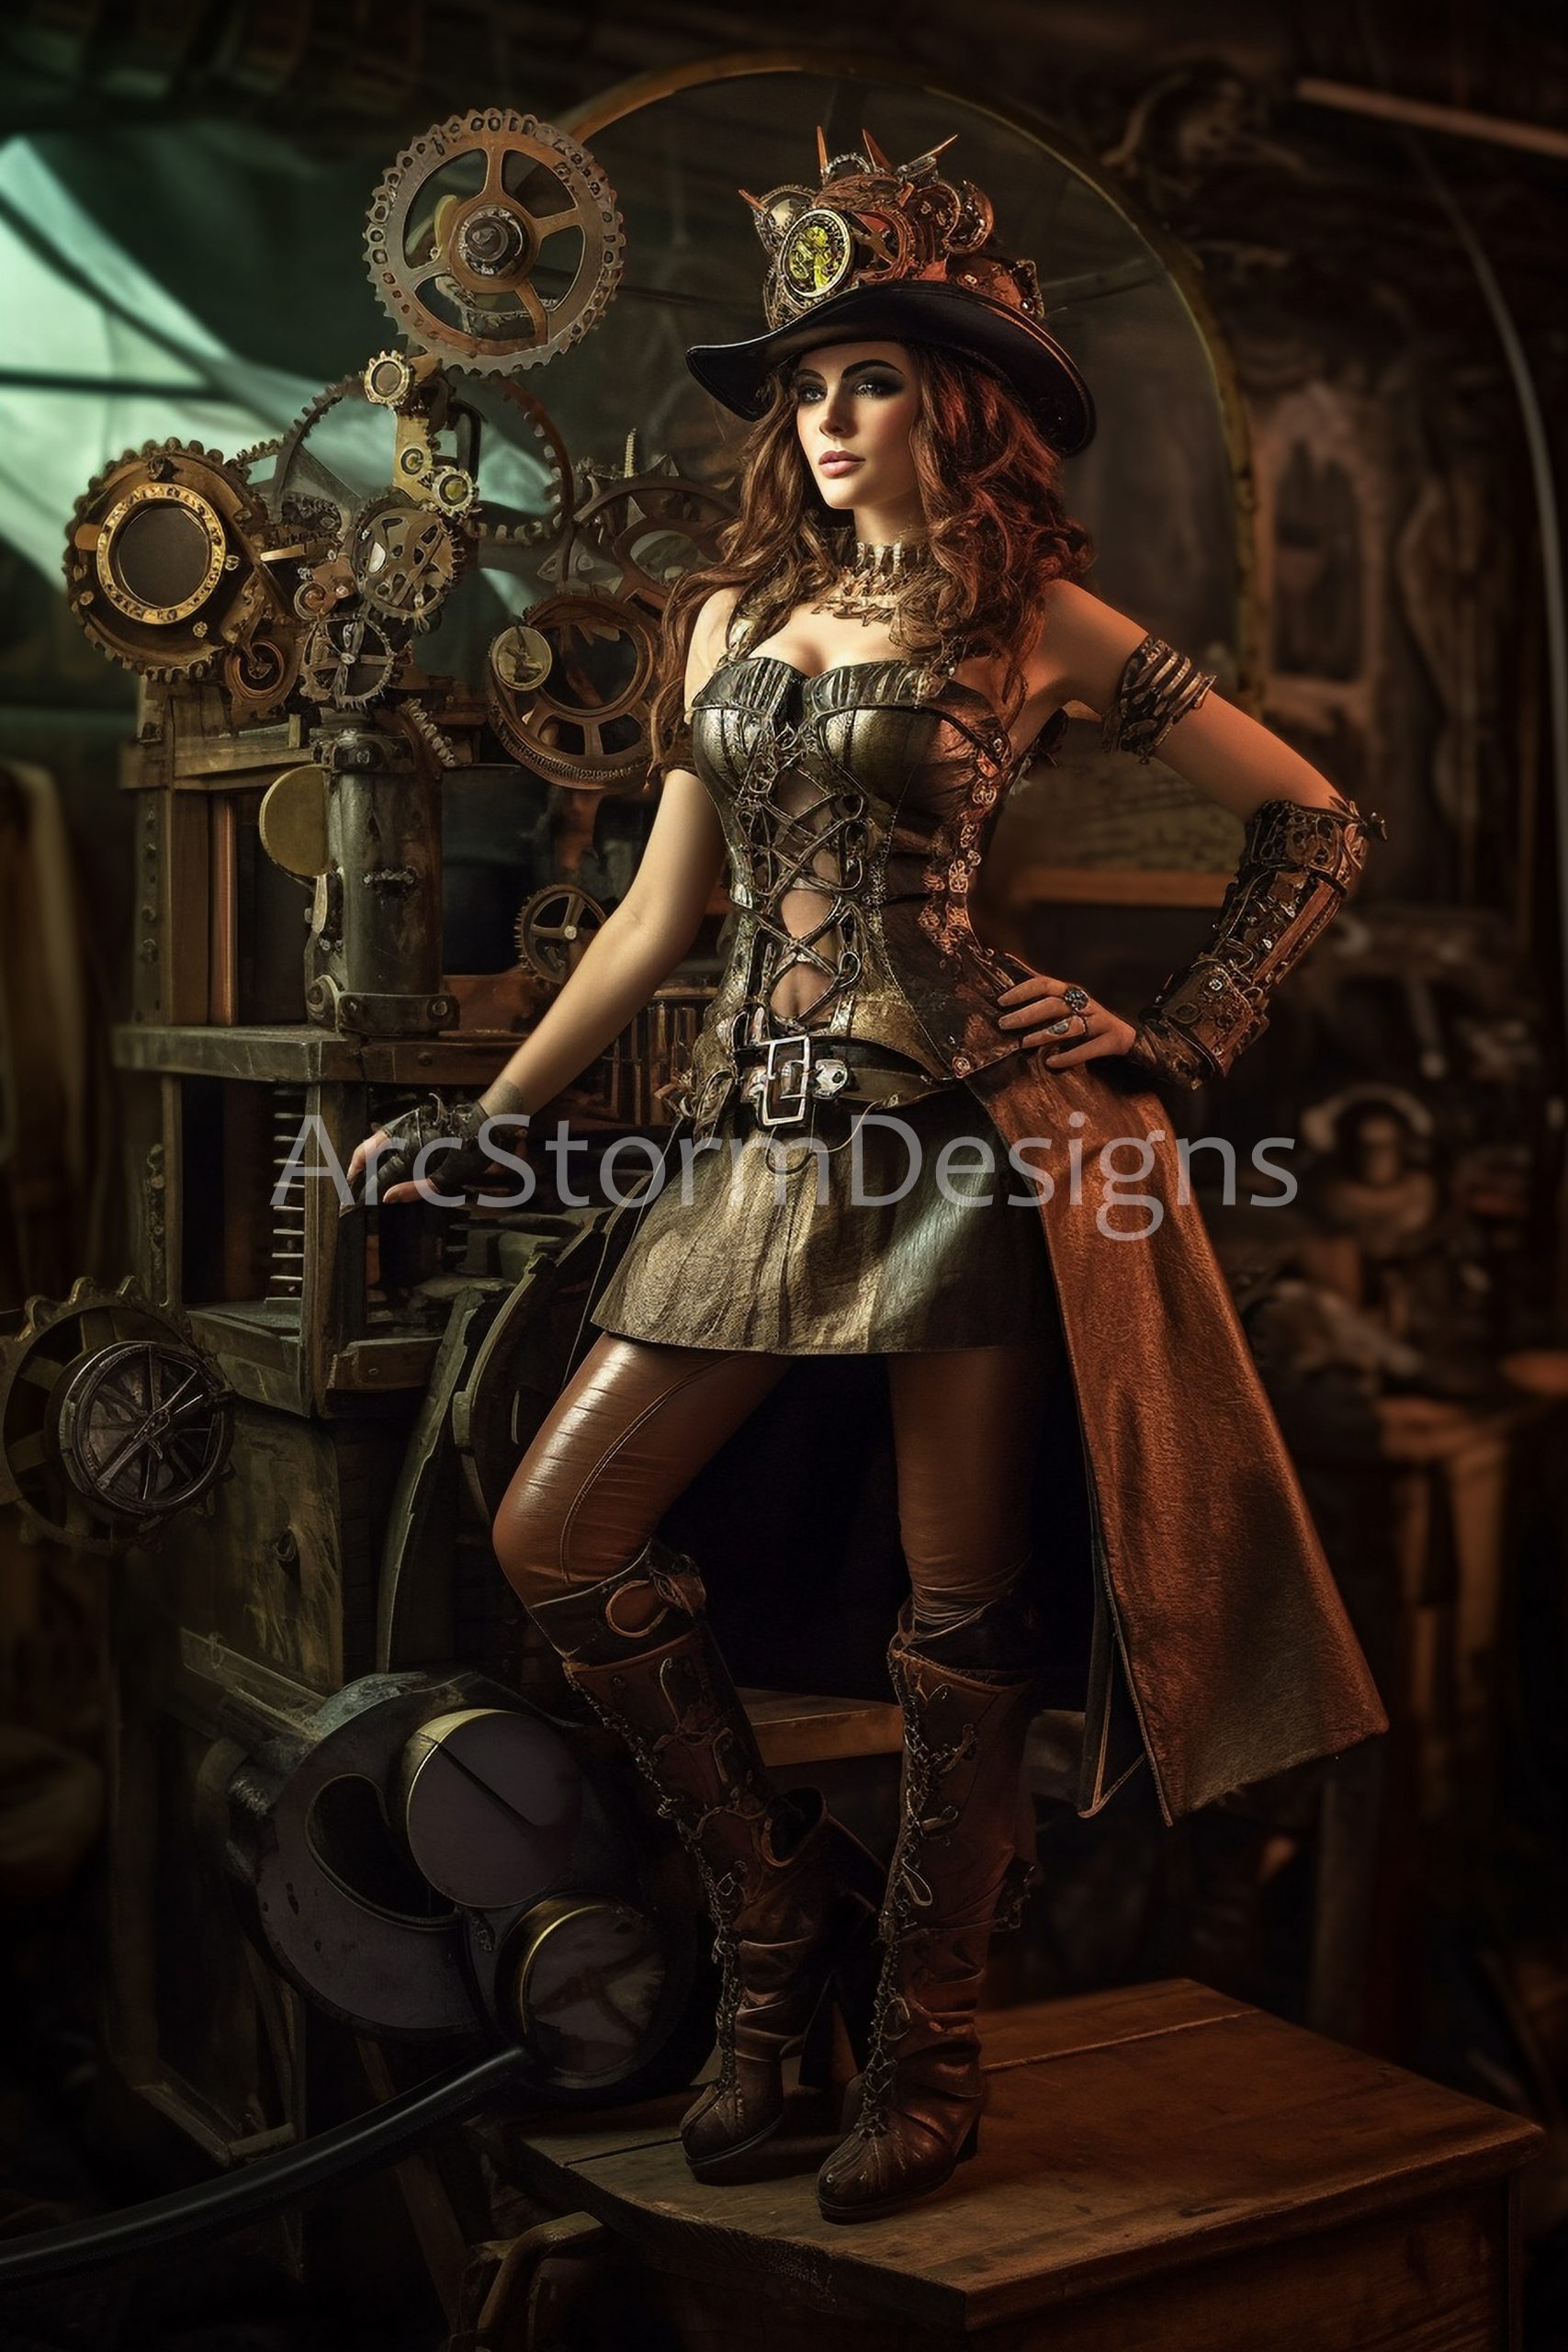 Gears and Gowns: The Fashion of Steampunk Women